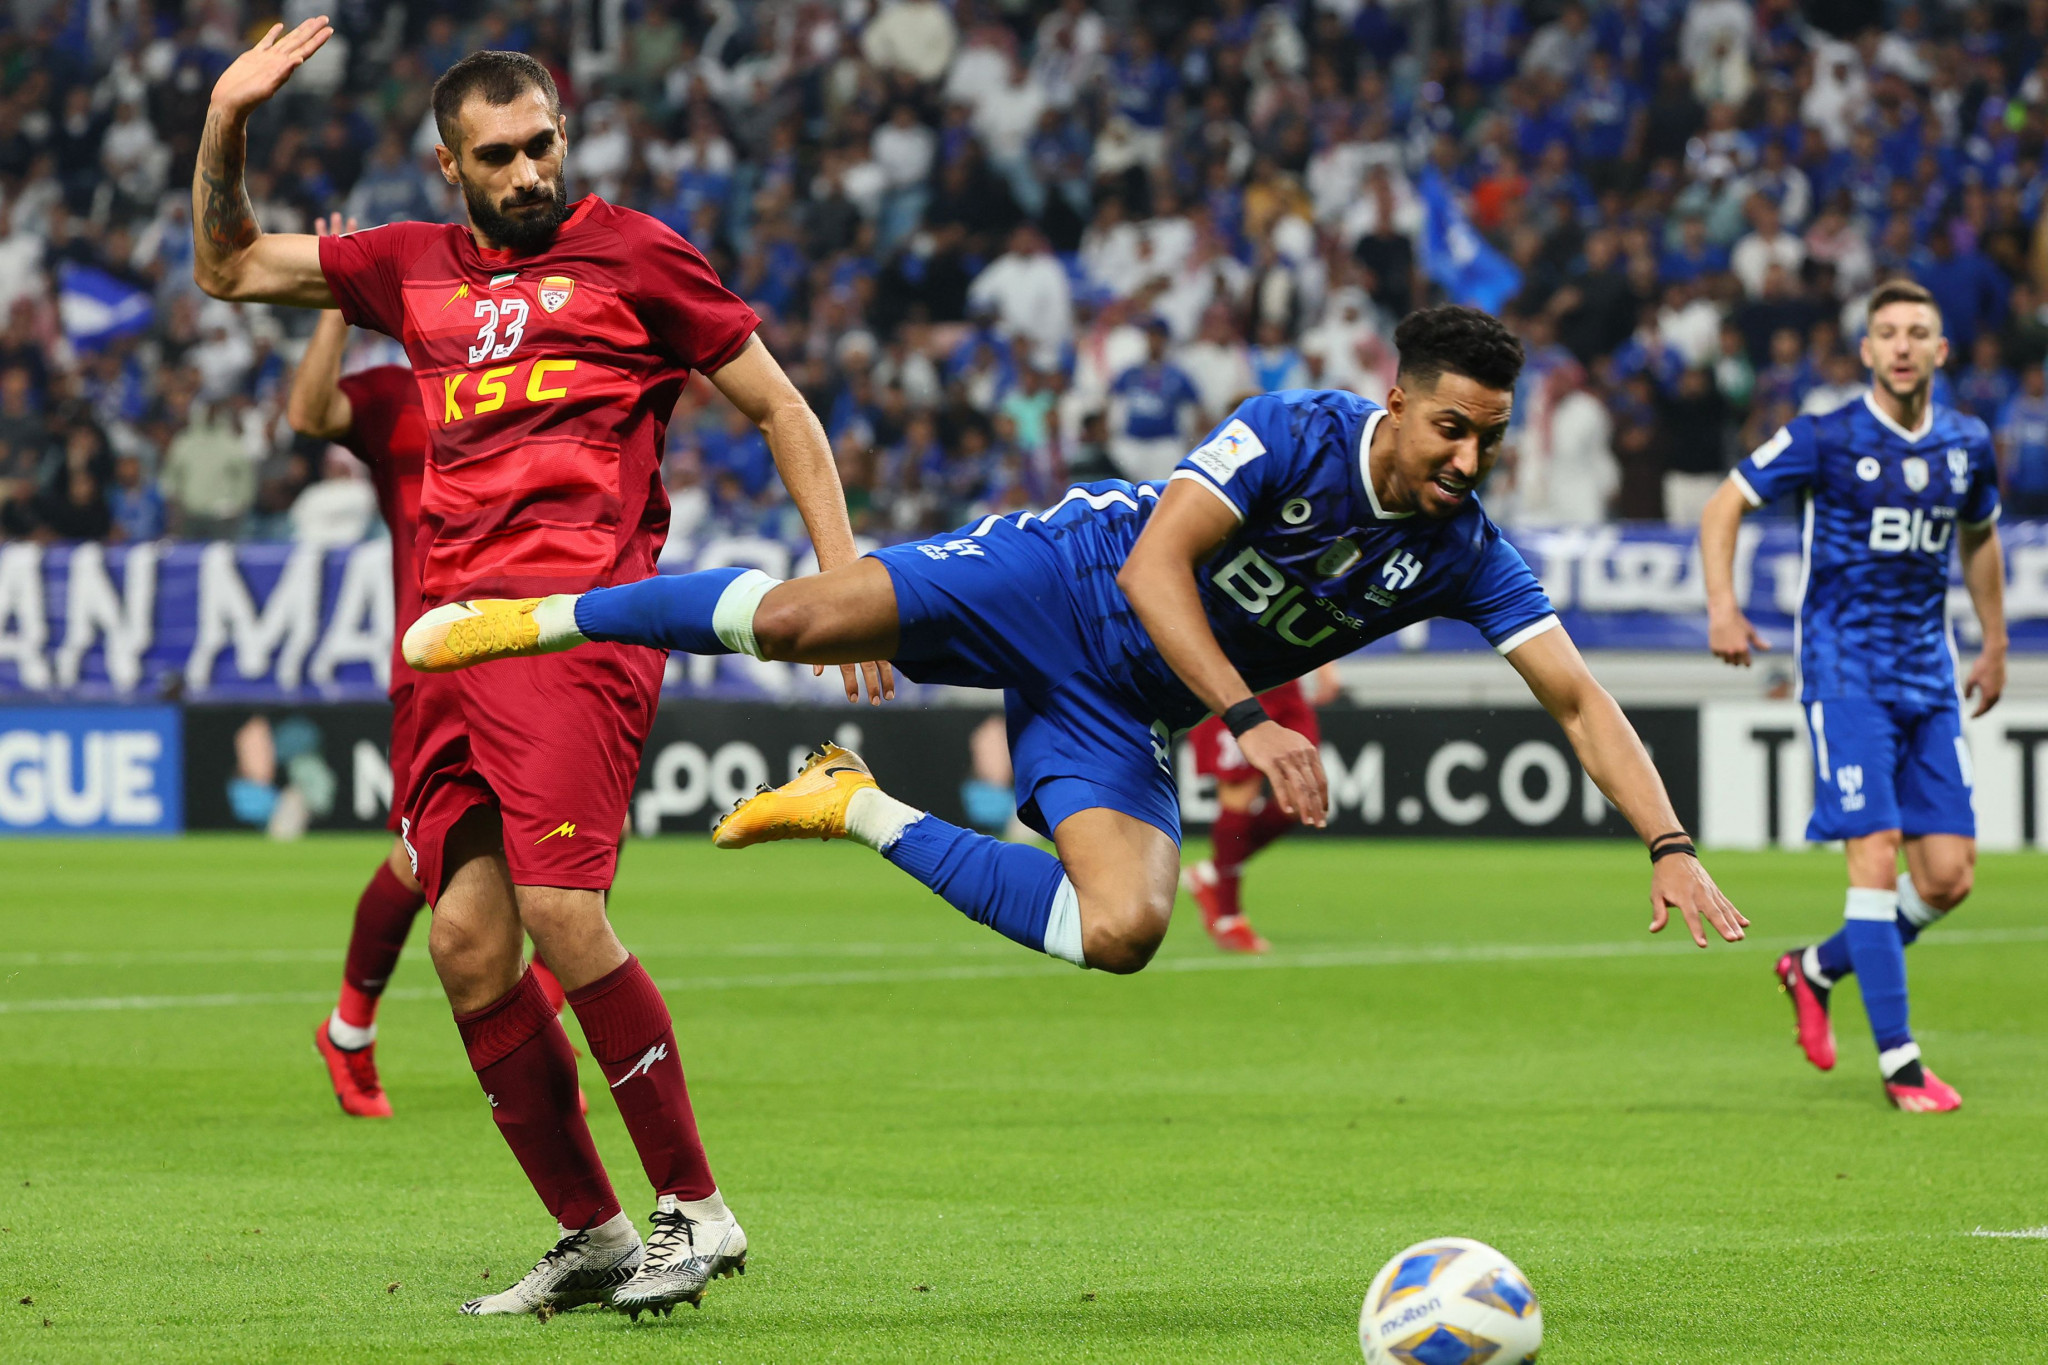 Action from the AFC Champions League quarter-final between Iranian club Foolad F.C. and Saudi Arabian side Al Hilal being played in Qatar ©Getty Images